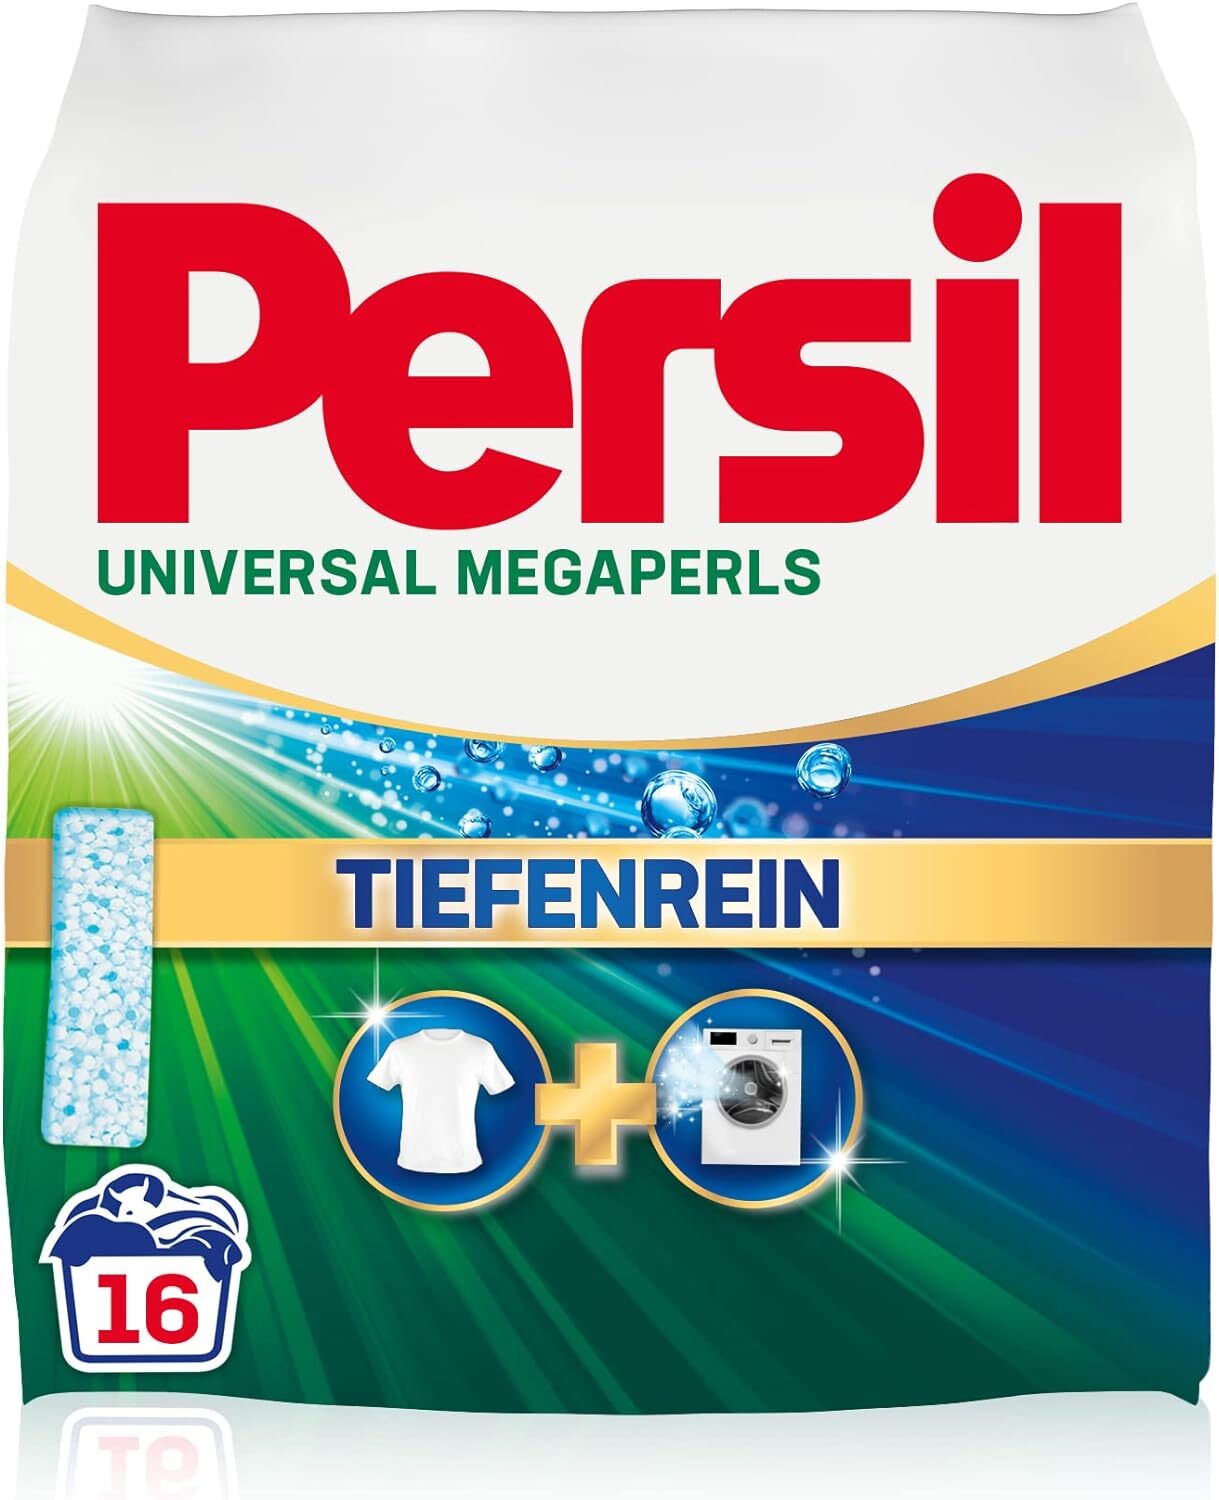 A box of Persil laundry detergent good for 16 loads